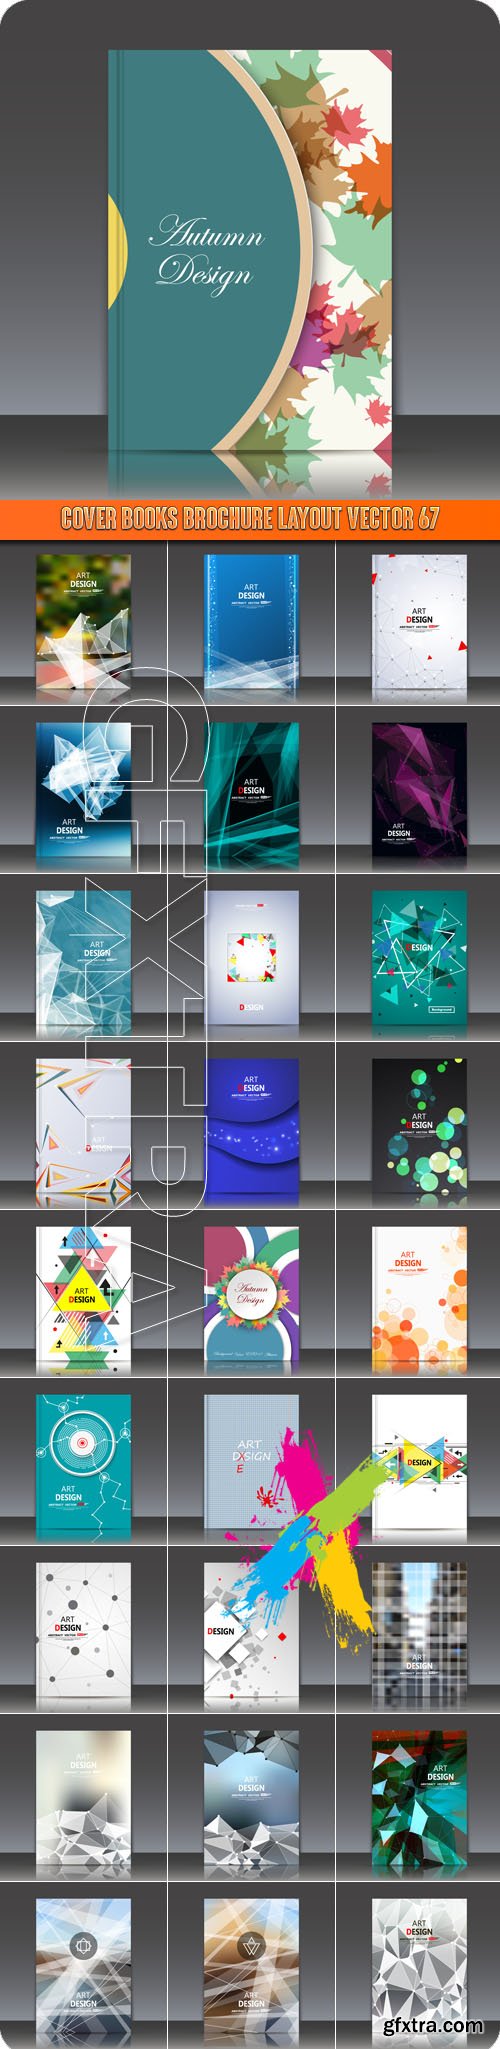 Cover books brochure layout vector 67